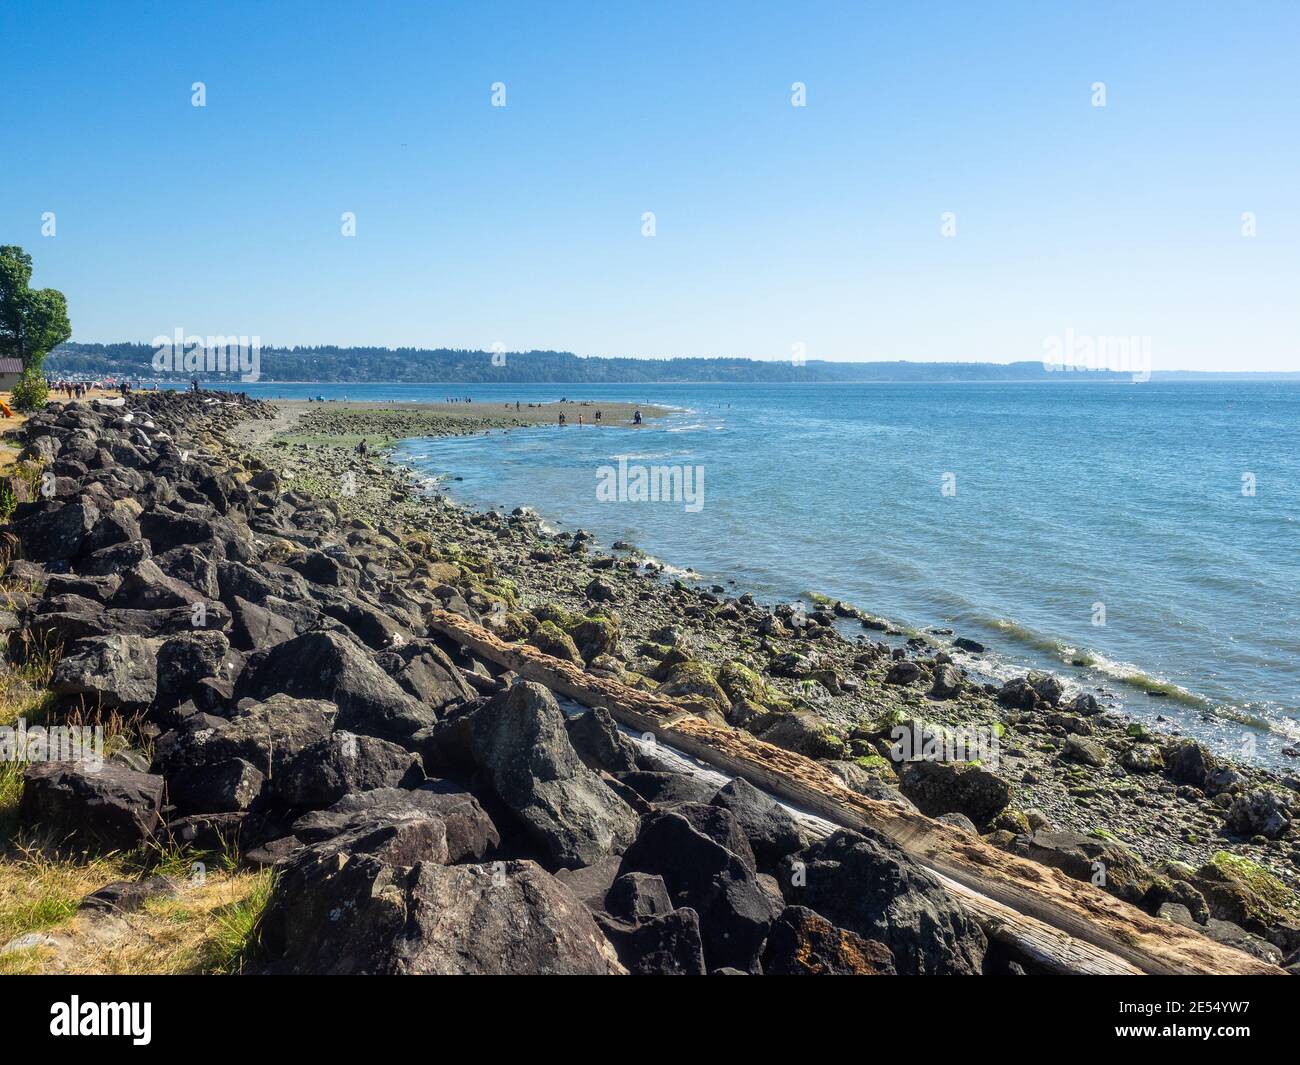 Saltwater State Park is a plot of second-growth timber on Puget Sound in the city of Des Moines, Washington, United States. The main attraction is sal Stock Photo